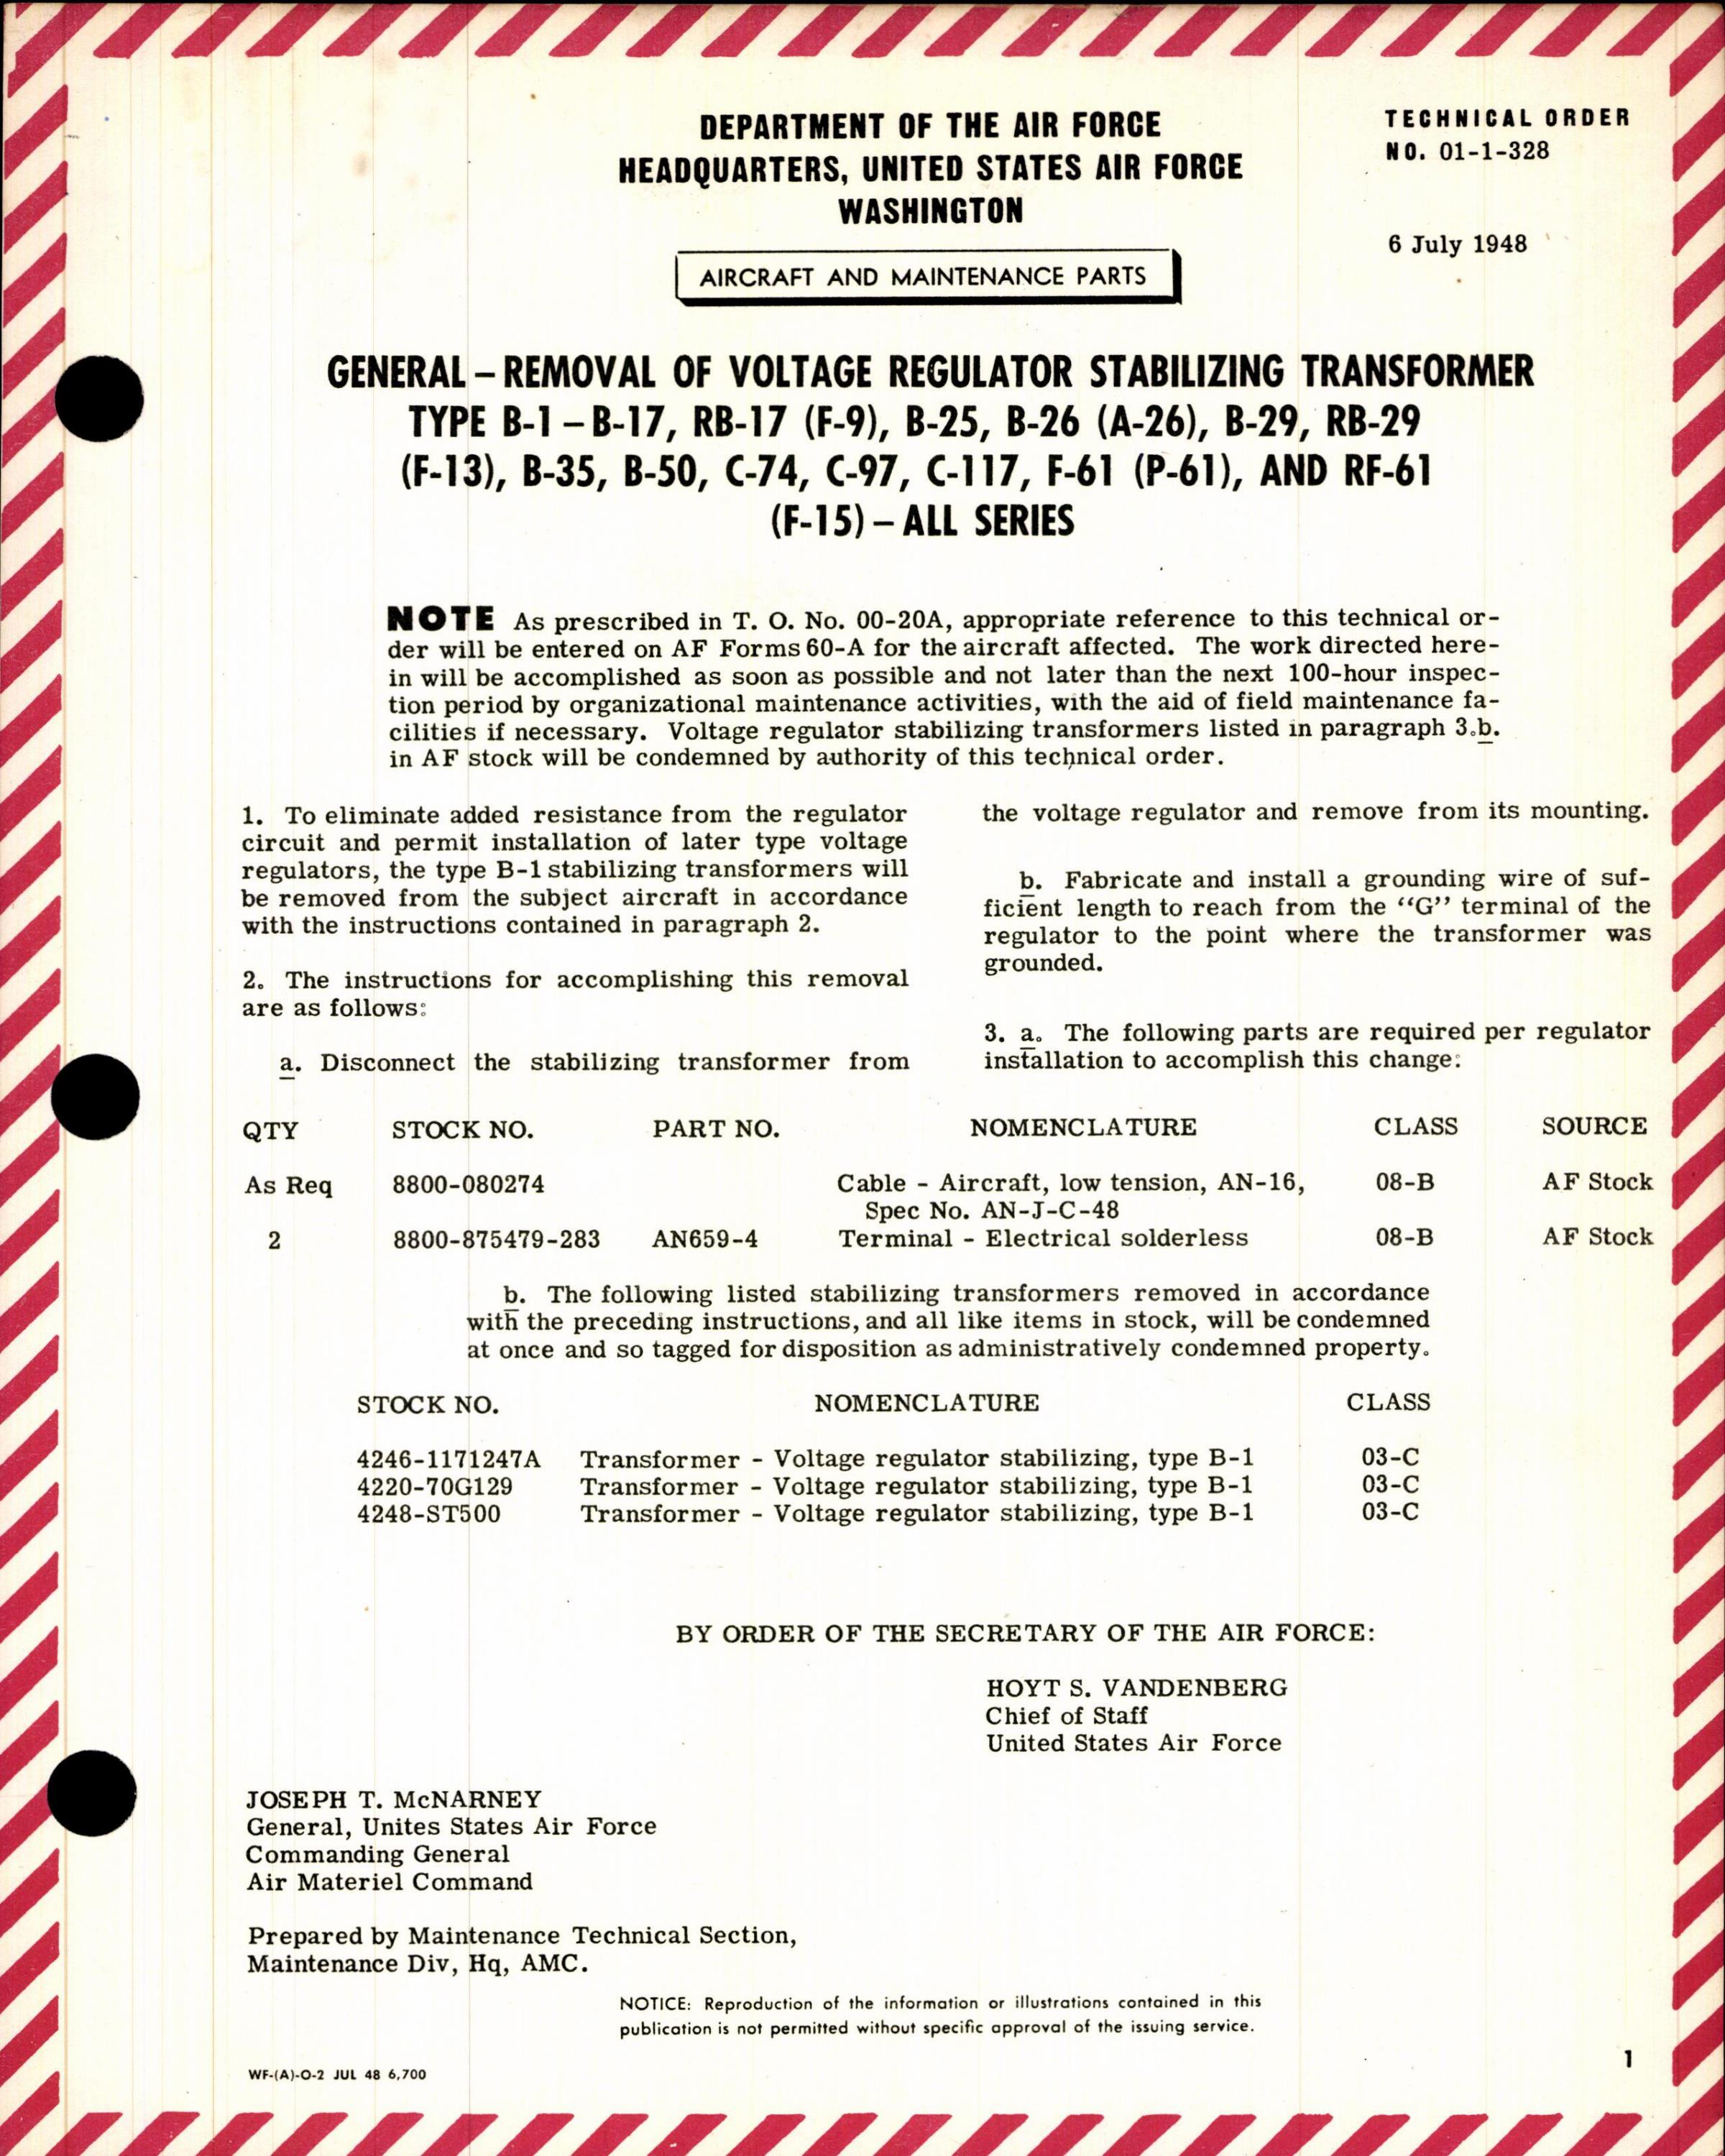 Sample page 1 from AirCorps Library document: Removal of Voltage Regulator Stabilizing Transformer